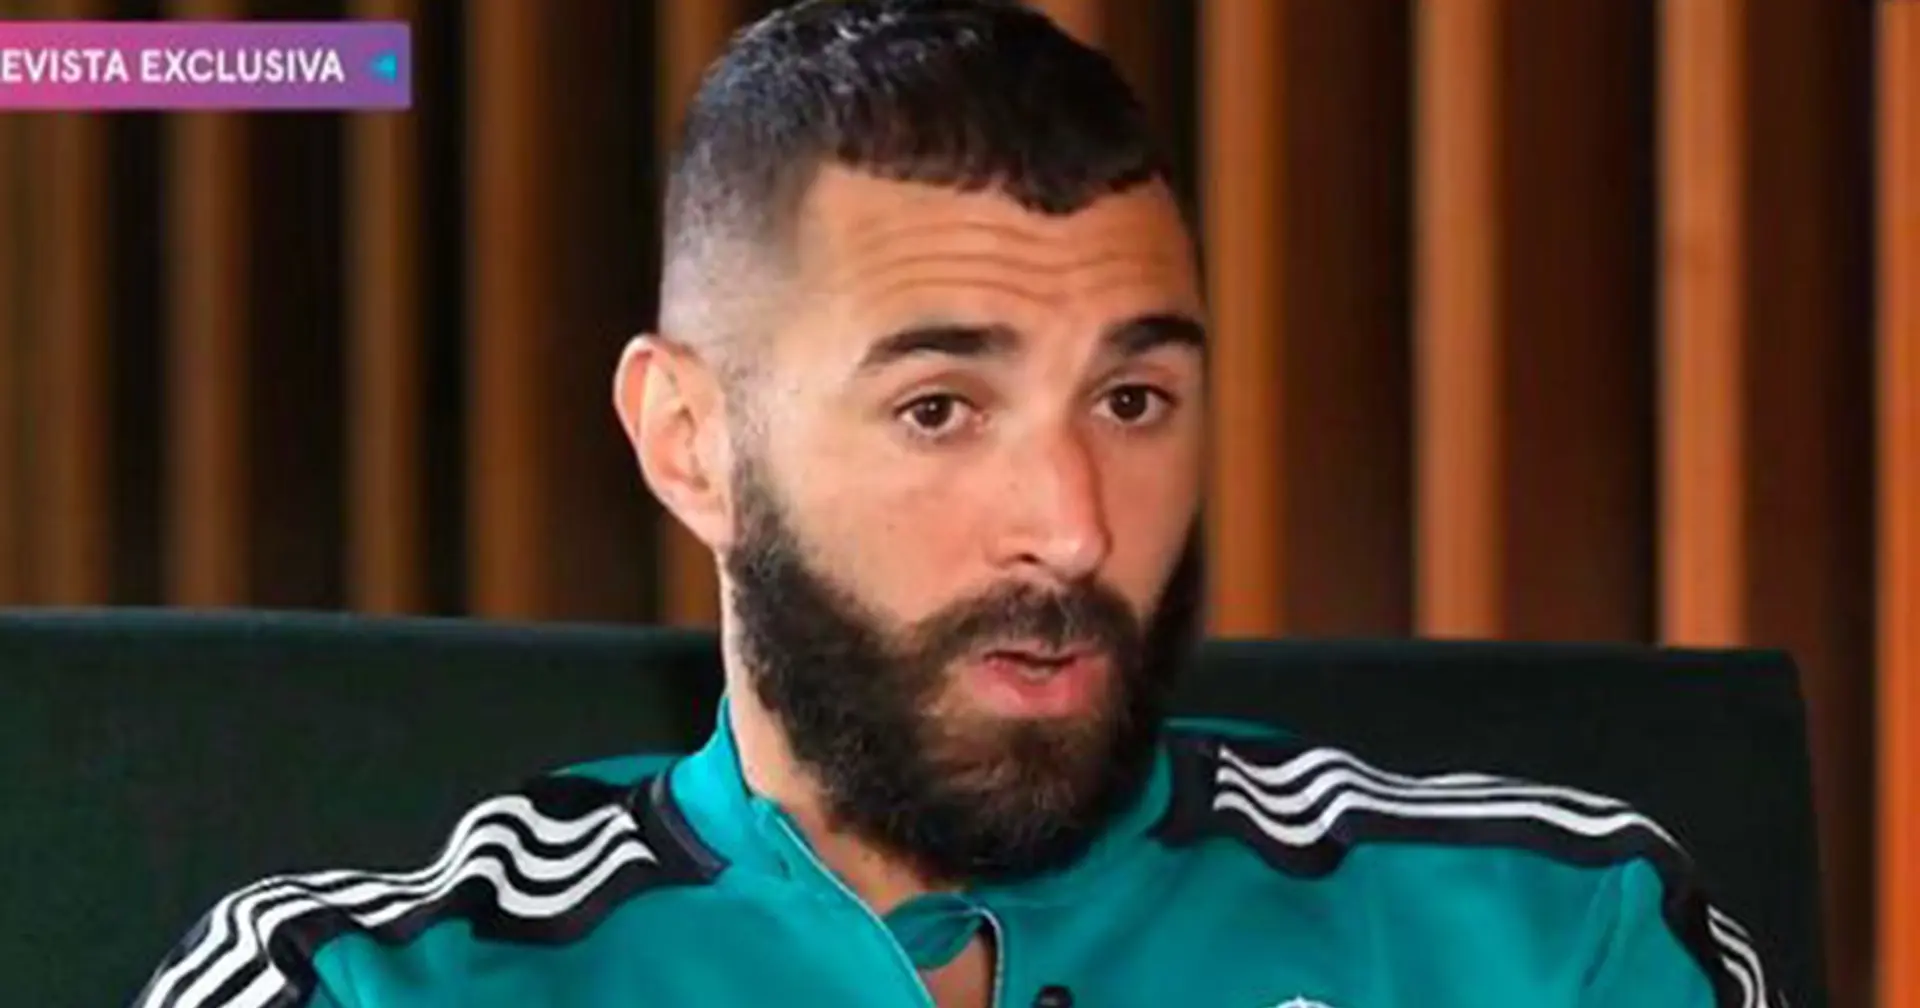 Big injury update on Benzema provided by reporters